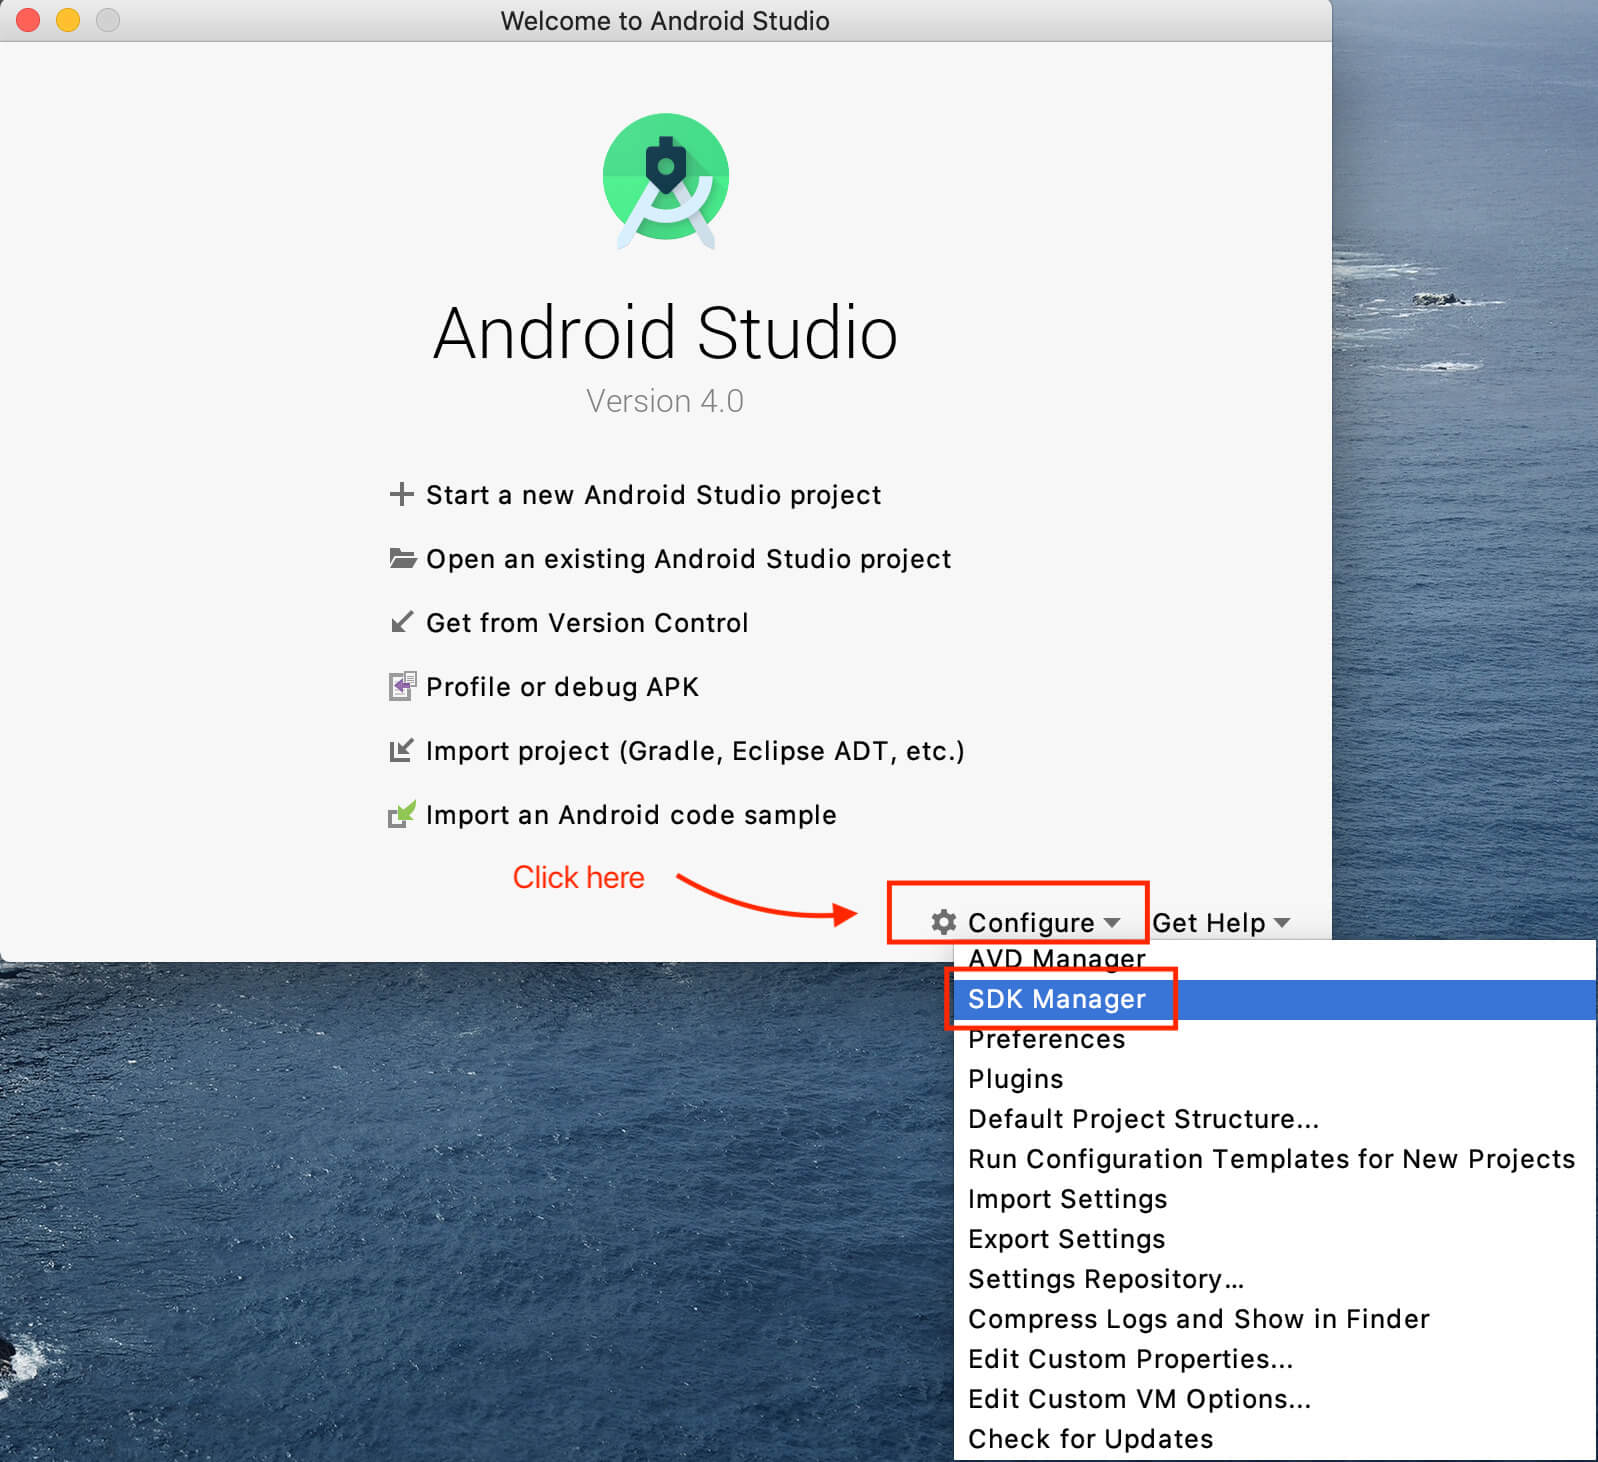 Shows Android studio home page and how someone can open SDK Manager by tapping on Configure button